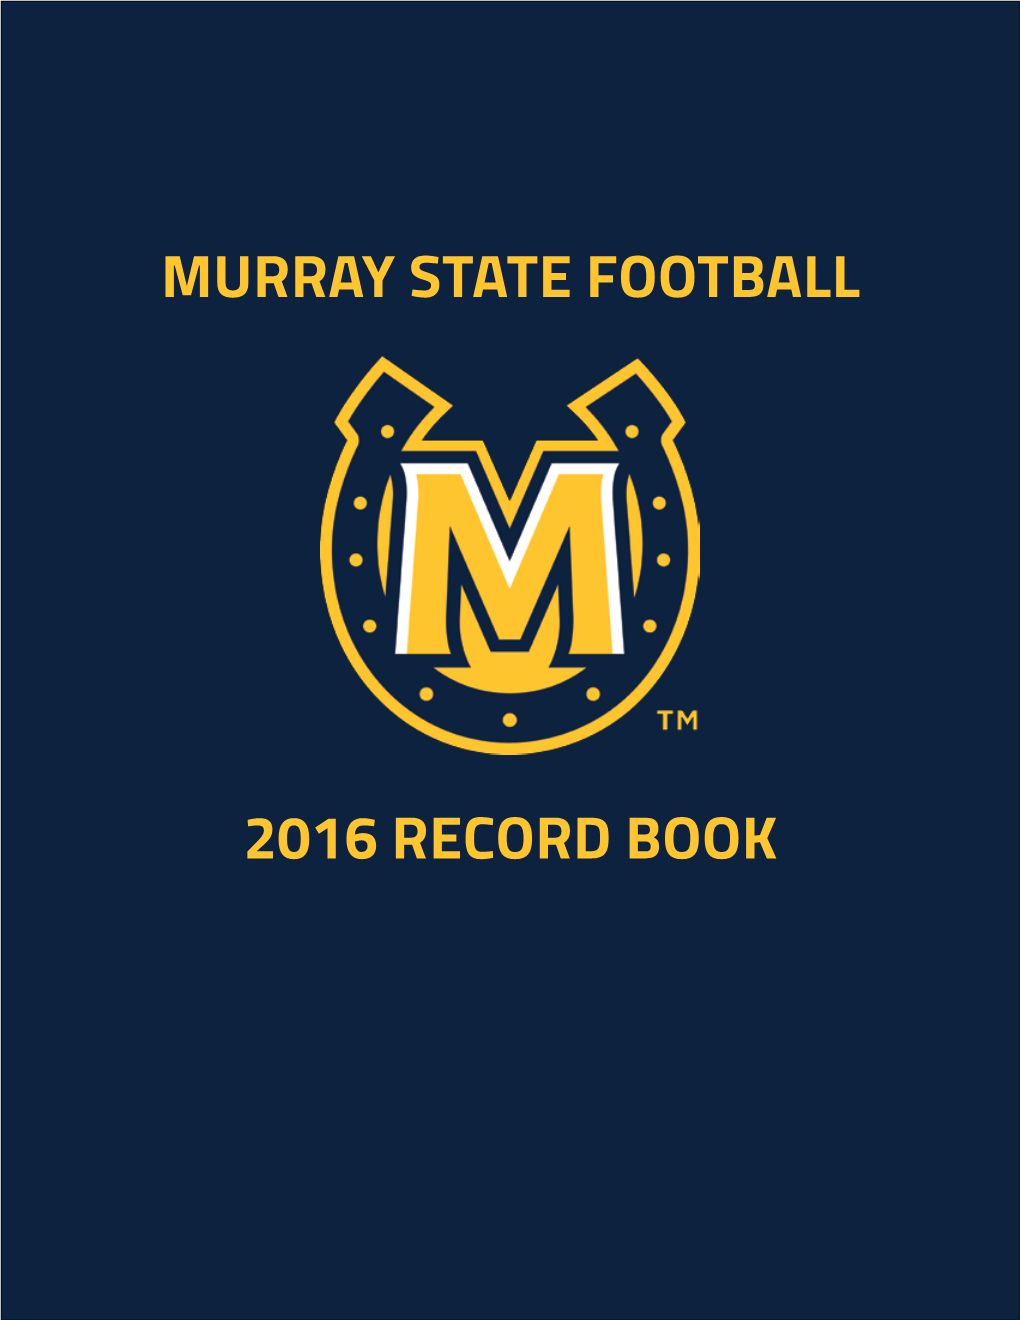 Murray State Football 2016 Record Book